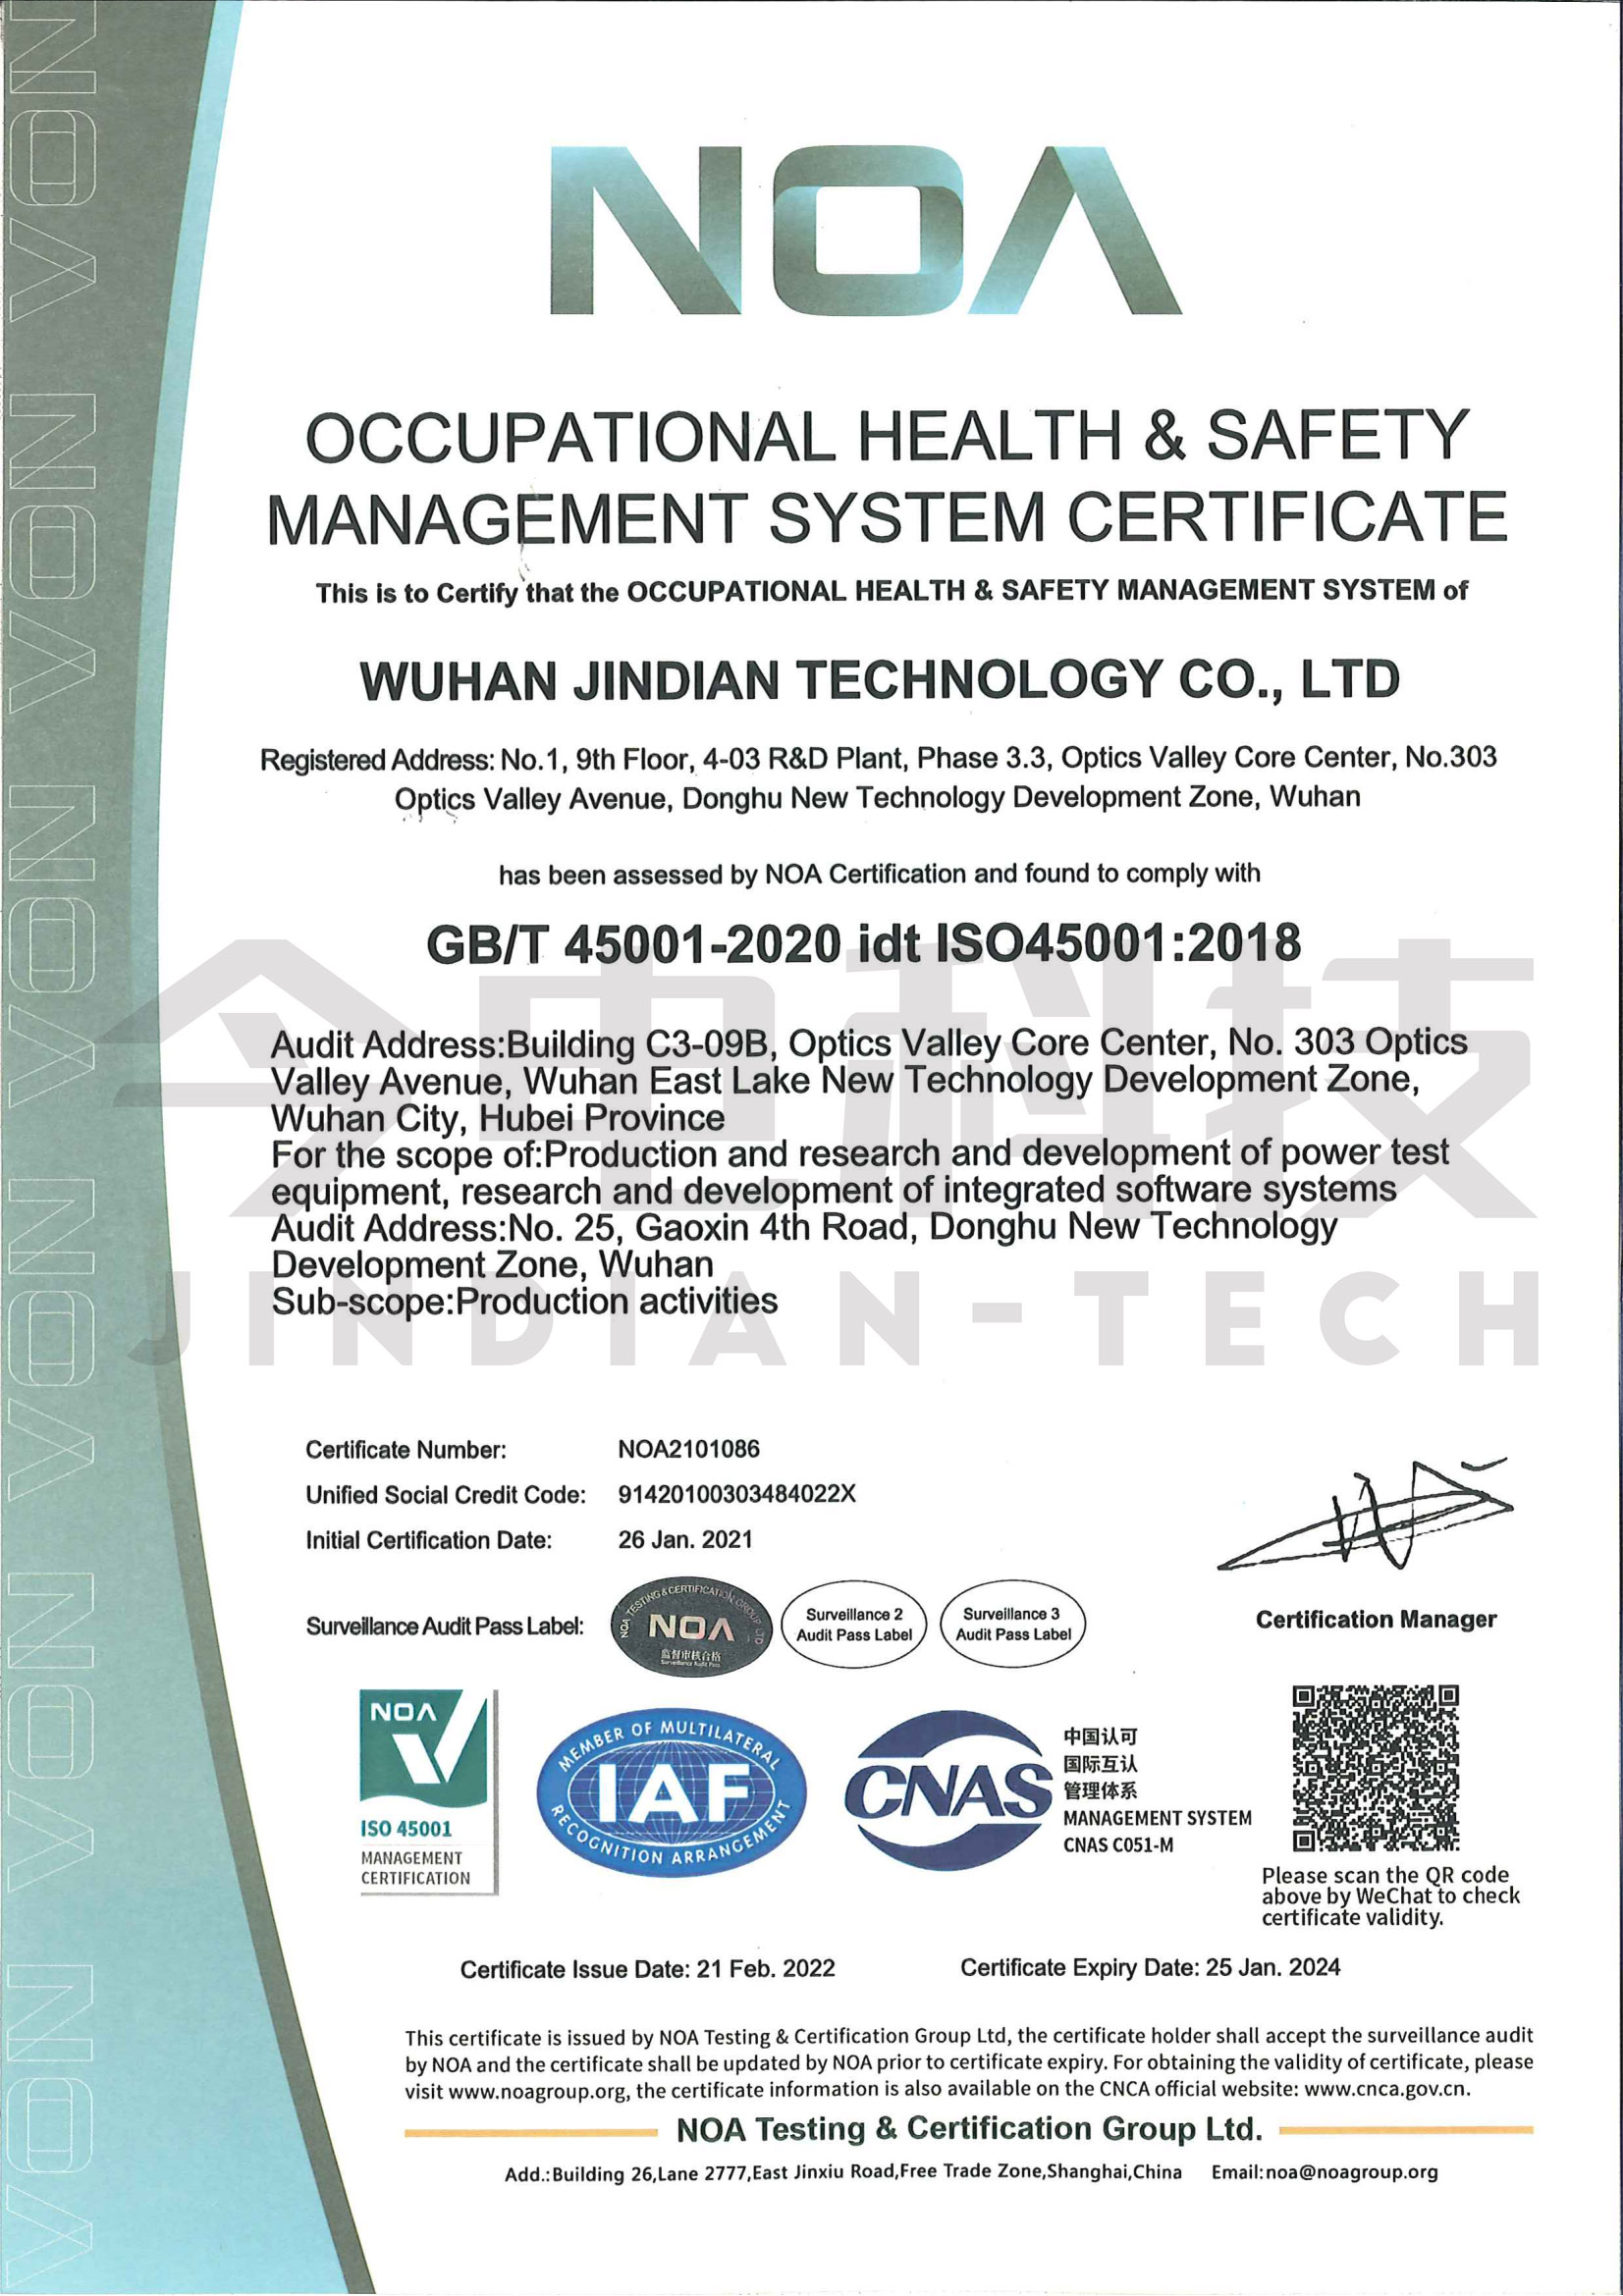  Occupational Health and Safety Management System Certificate (English version)